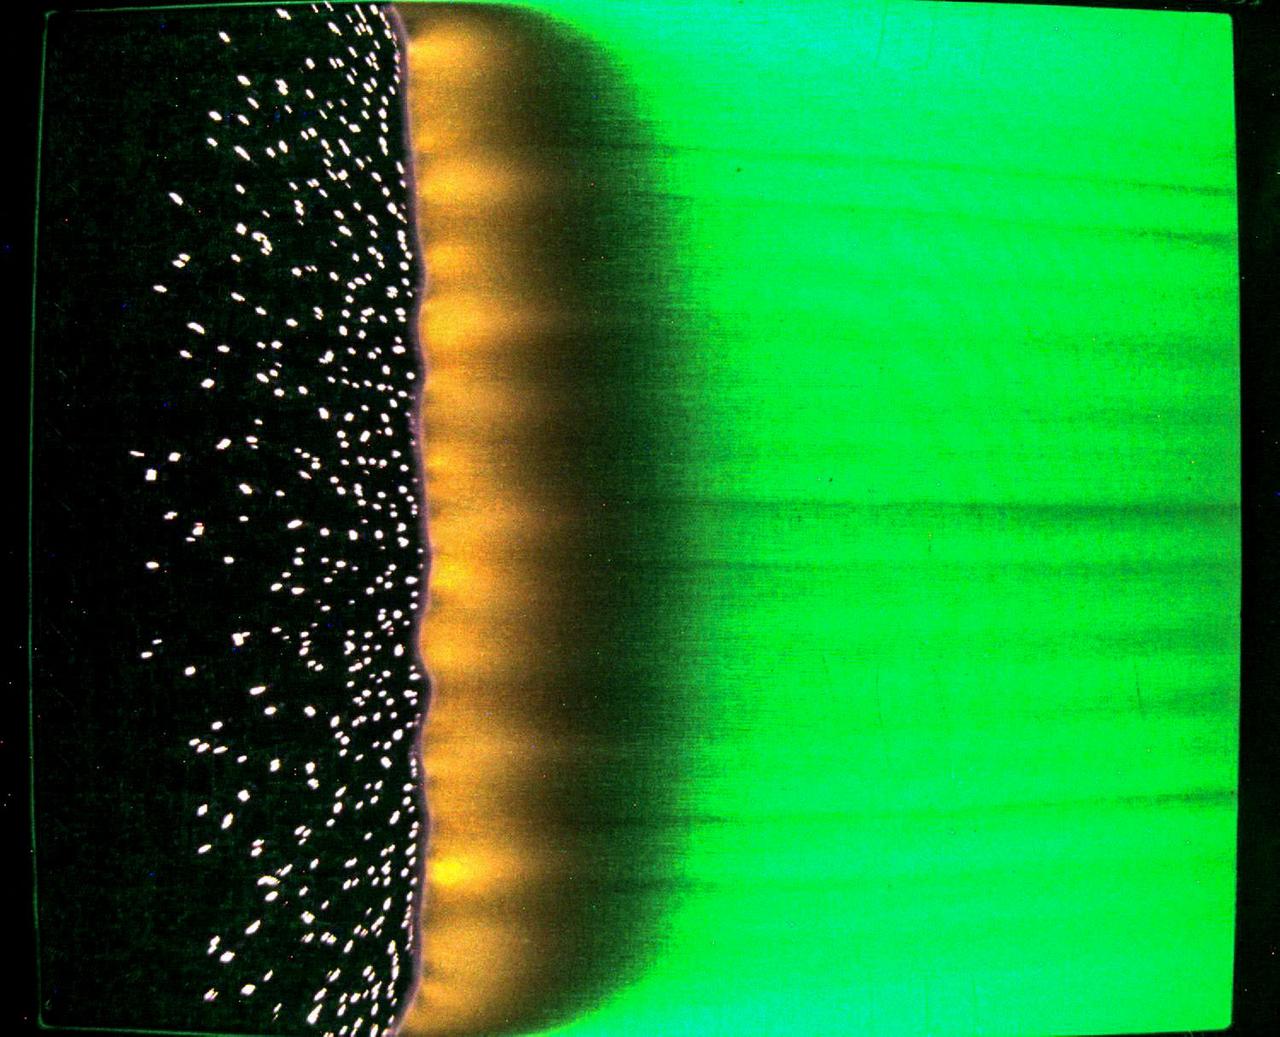 A sample of fabric burns inside Spacecraft Fire Experiment-IV (Saffire-IV). The sample is a composite fabric made of cotton and fiberglass and is 40 cm wide. The image appears green on the right because green LED lights are used to illuminate the sample during the burn. An orange flame sits top to bottom in the center of the image with a dark region between the orange and green areas. Bright specks on a black background to the left of the orange area show the smoldering cotton that remains on the fiberglass substrate after the flame passes